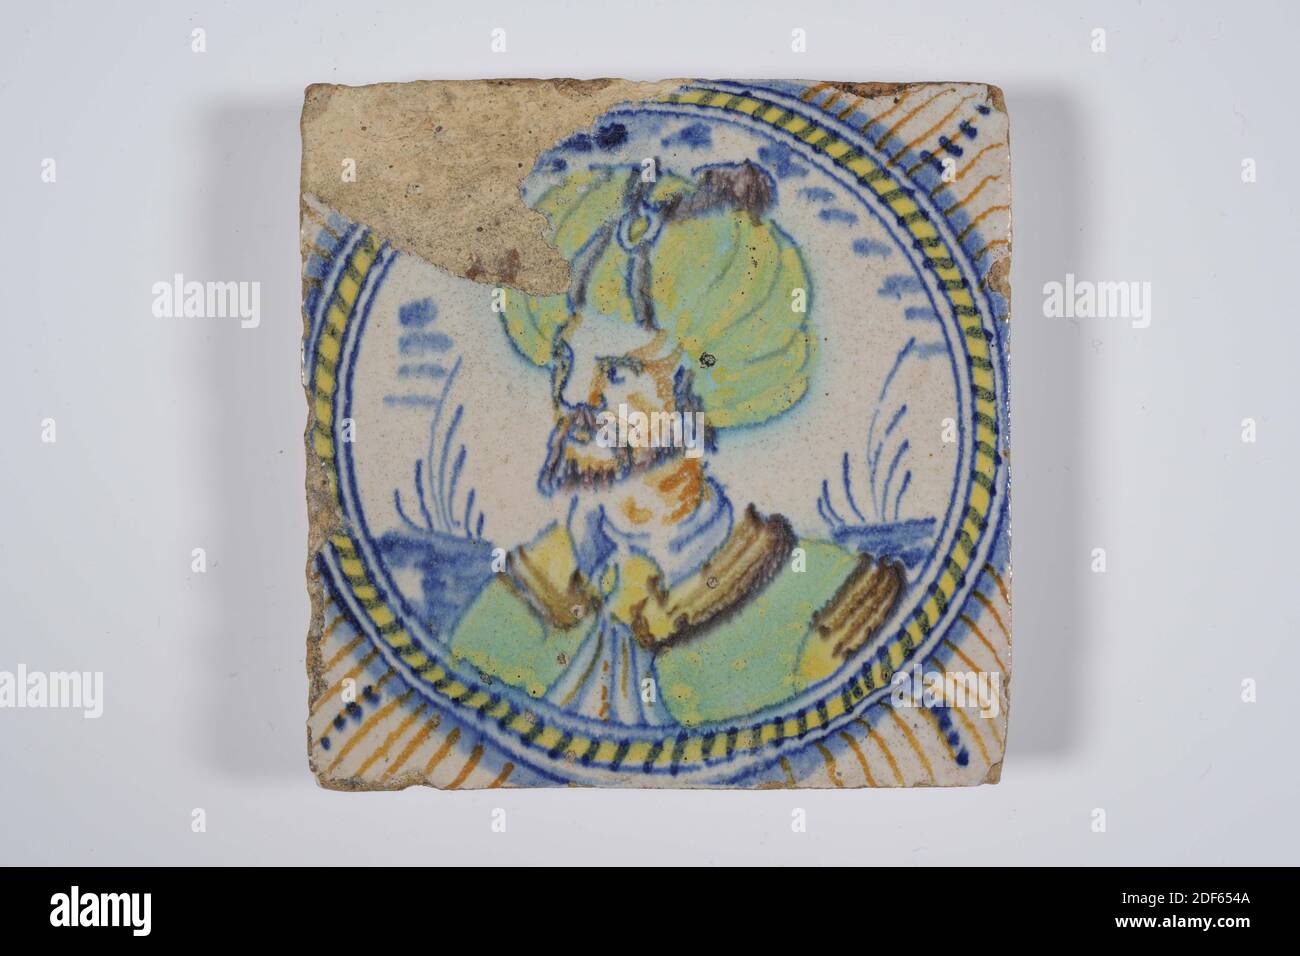 wall tile, Anonymous, 16th century, tin glaze, earthenware, General: 9.6 x 9.6 x 1.5cm (96 x 96 x 15mm), man's portrait, southern netherlands, Wall tile of earthenware covered with tin glaze. The tile is multicolored painted in blue, green, yellow and brown-orange. On the tile is a portrait of the Turkish ruler Soliman, depicted with a turban, depicted in a circular medallion with circular bands and a cable edge. The tile has a corner motif with stripes, Date1985 Stock Photo